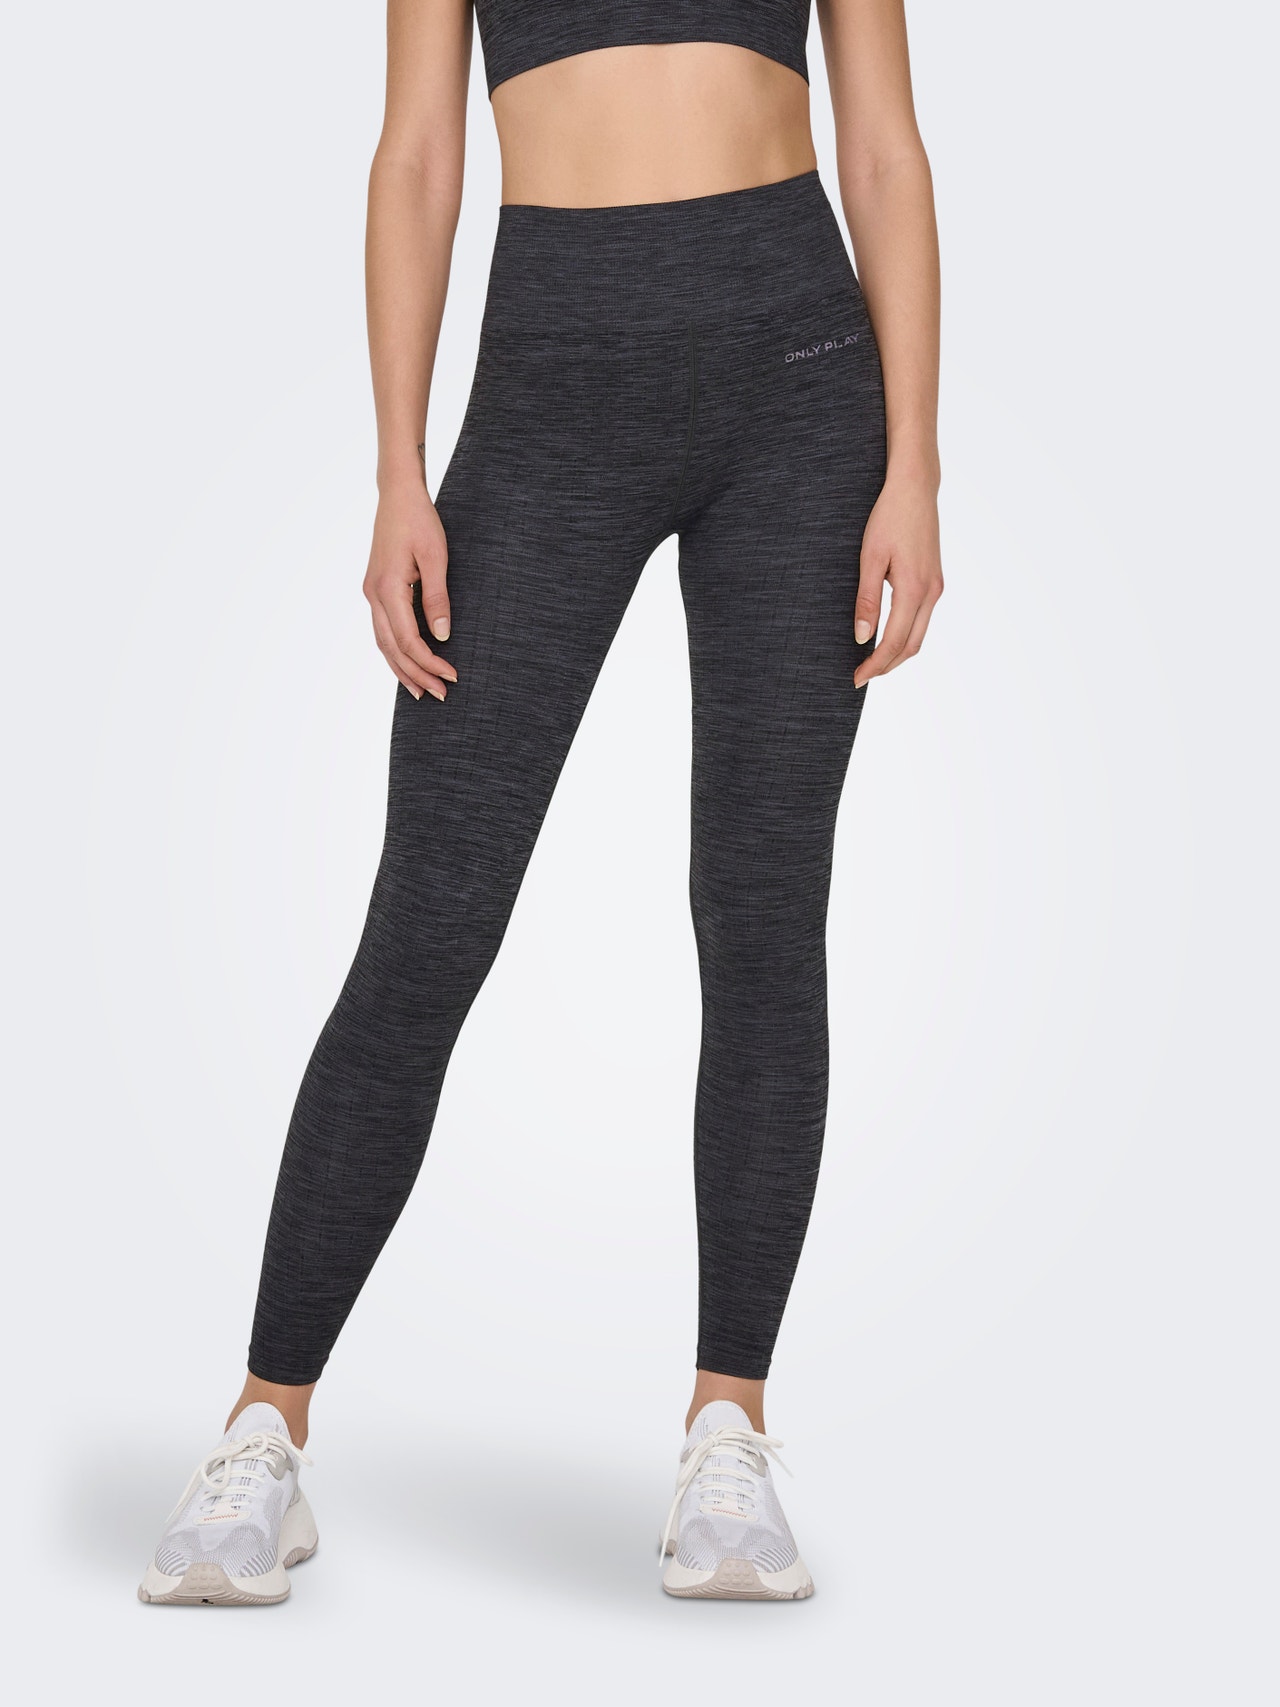 Nike Women's One Luxe Heathered Mid-Rise Training Leggings